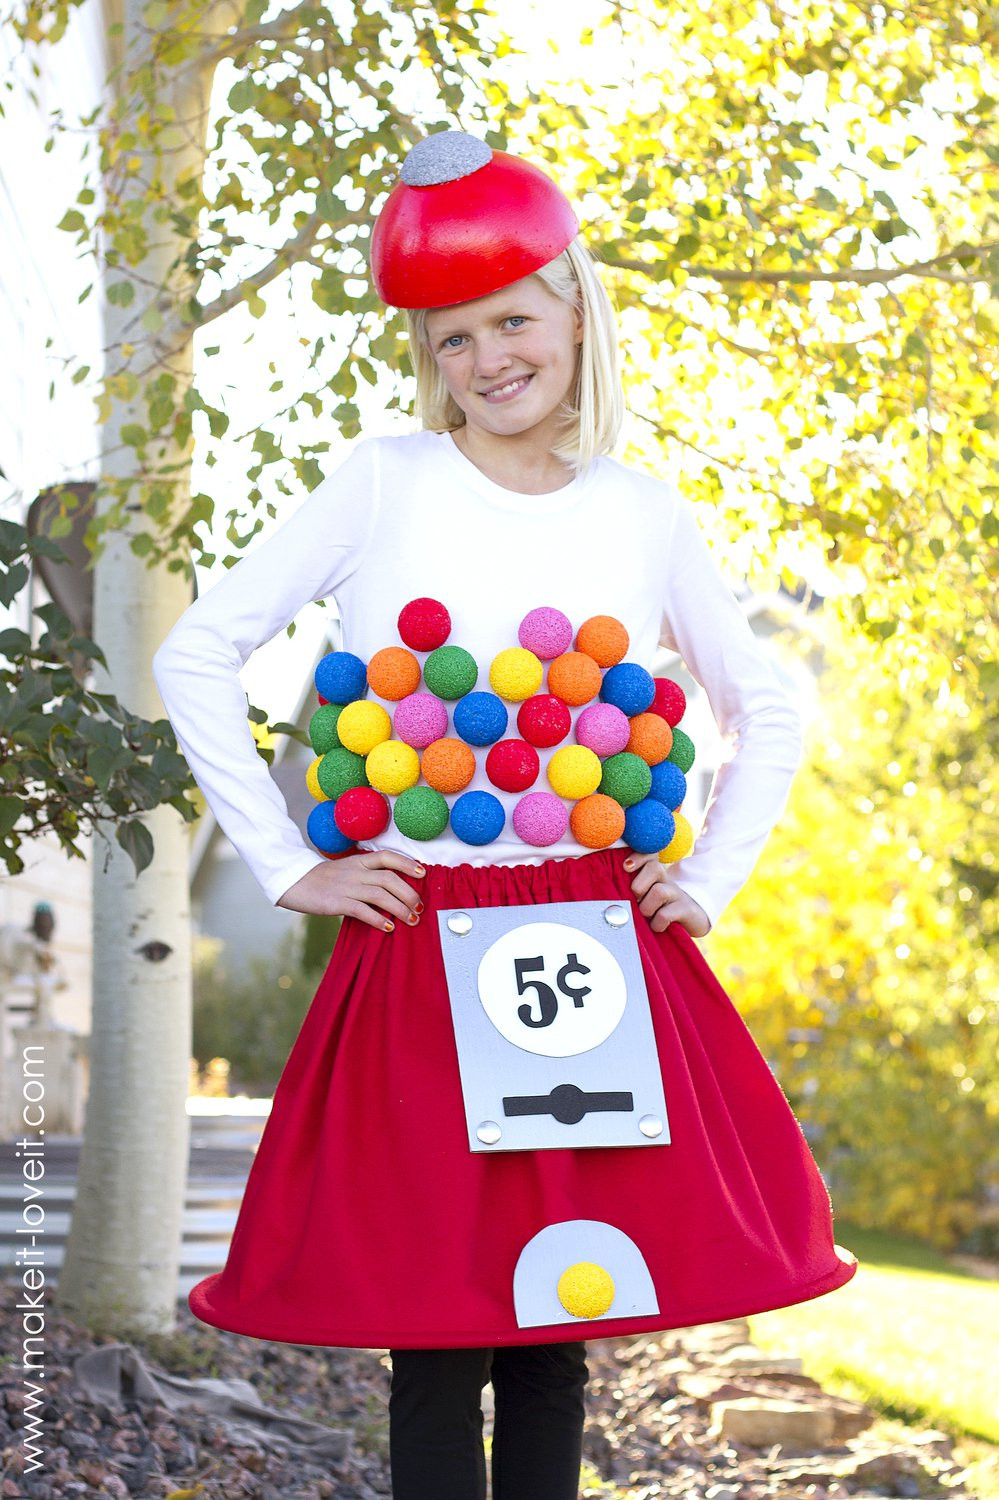 DIY Halloween Costume Ideas
 The 15 Best DIY Halloween Costumes for Adults